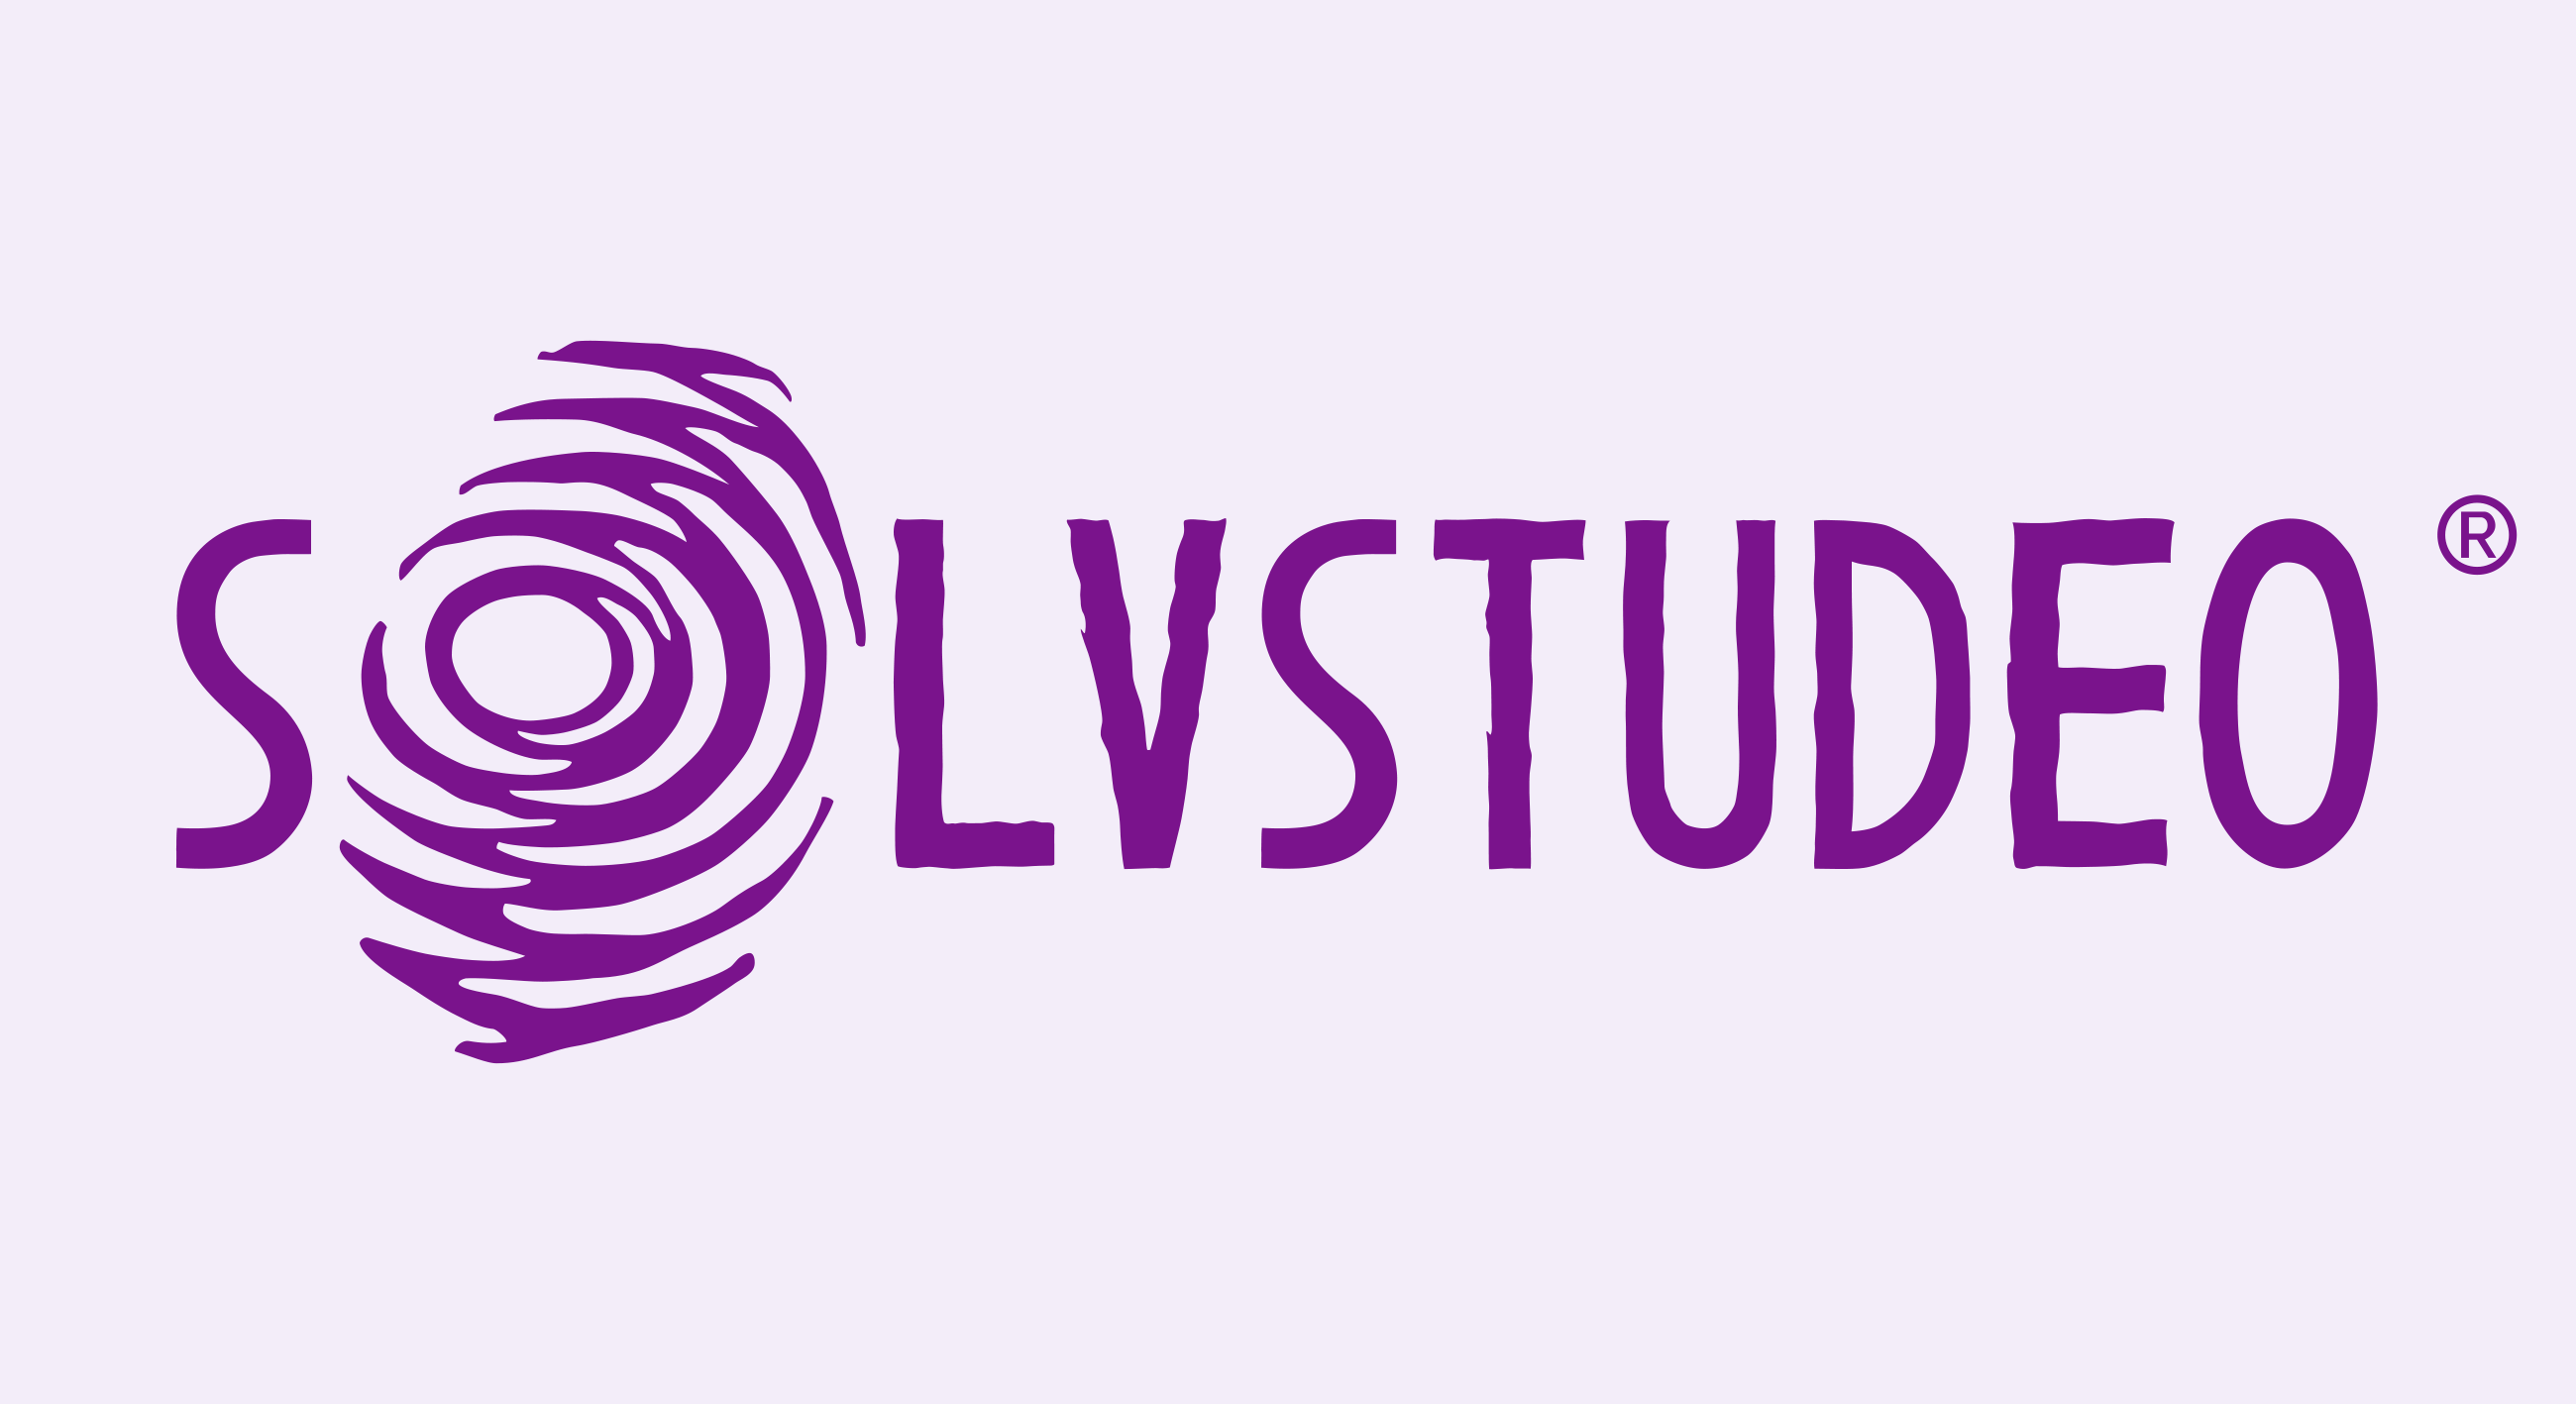 Logo of SOLVSTUDEO - the research product category for transforming performance through strategy